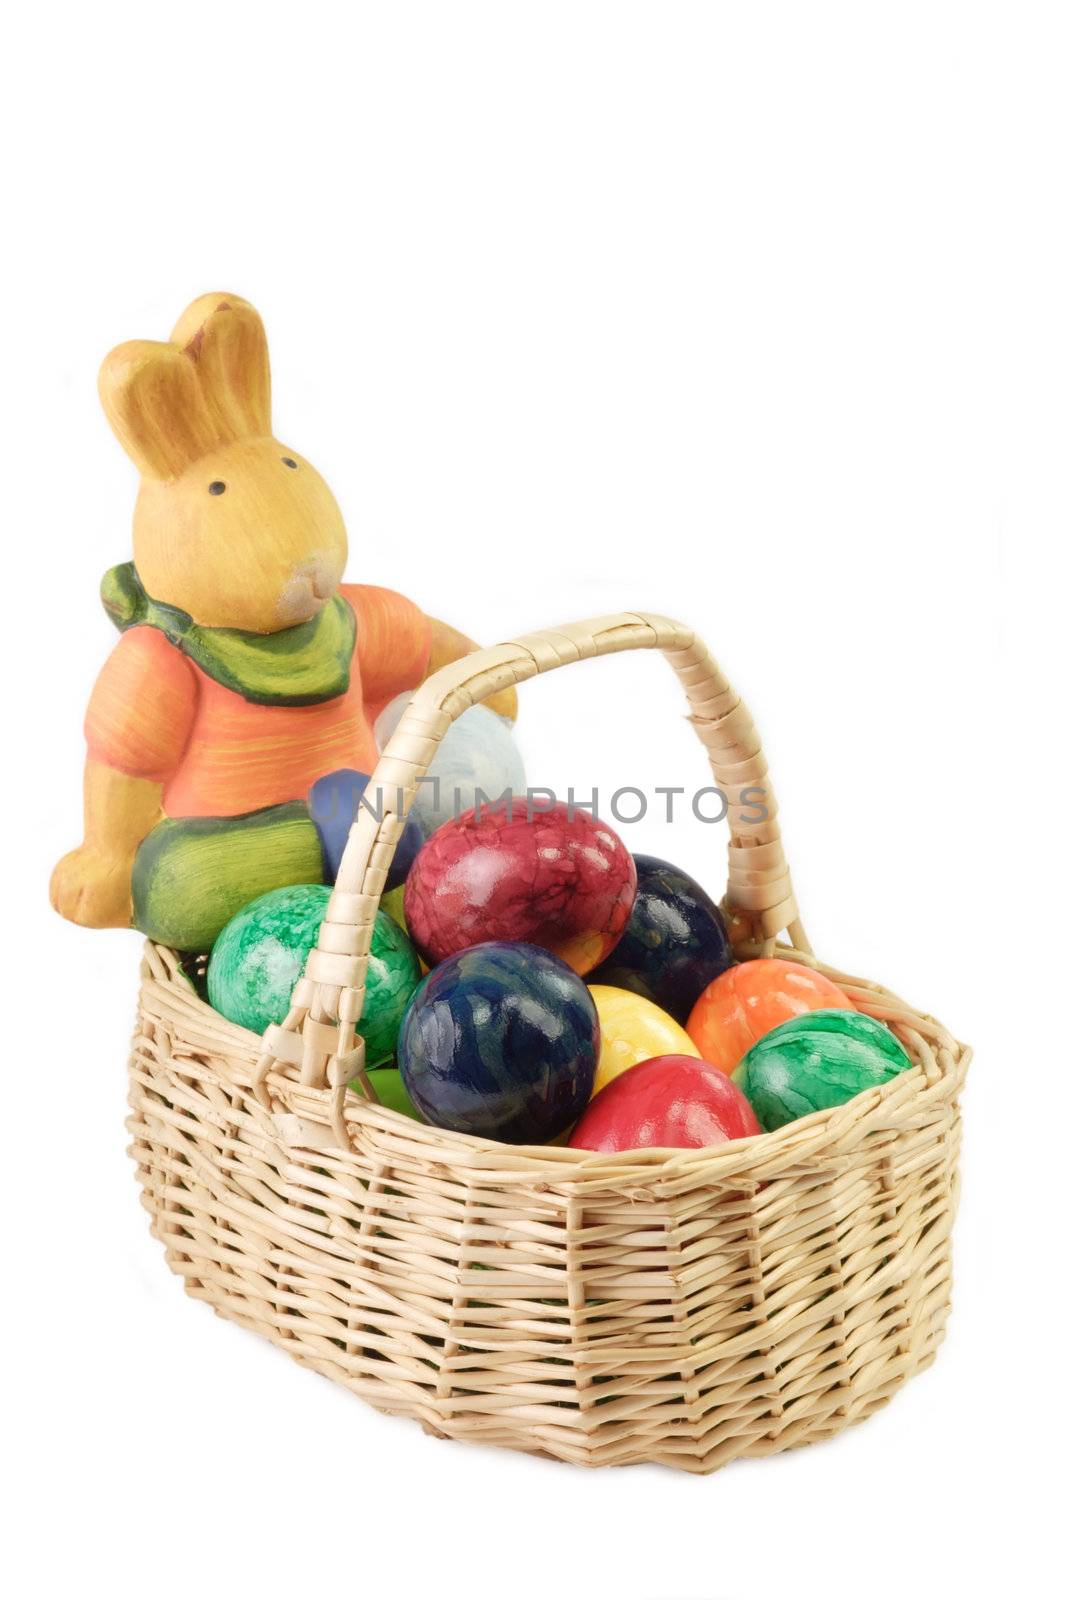 
Colorful Easter decoration on white Background